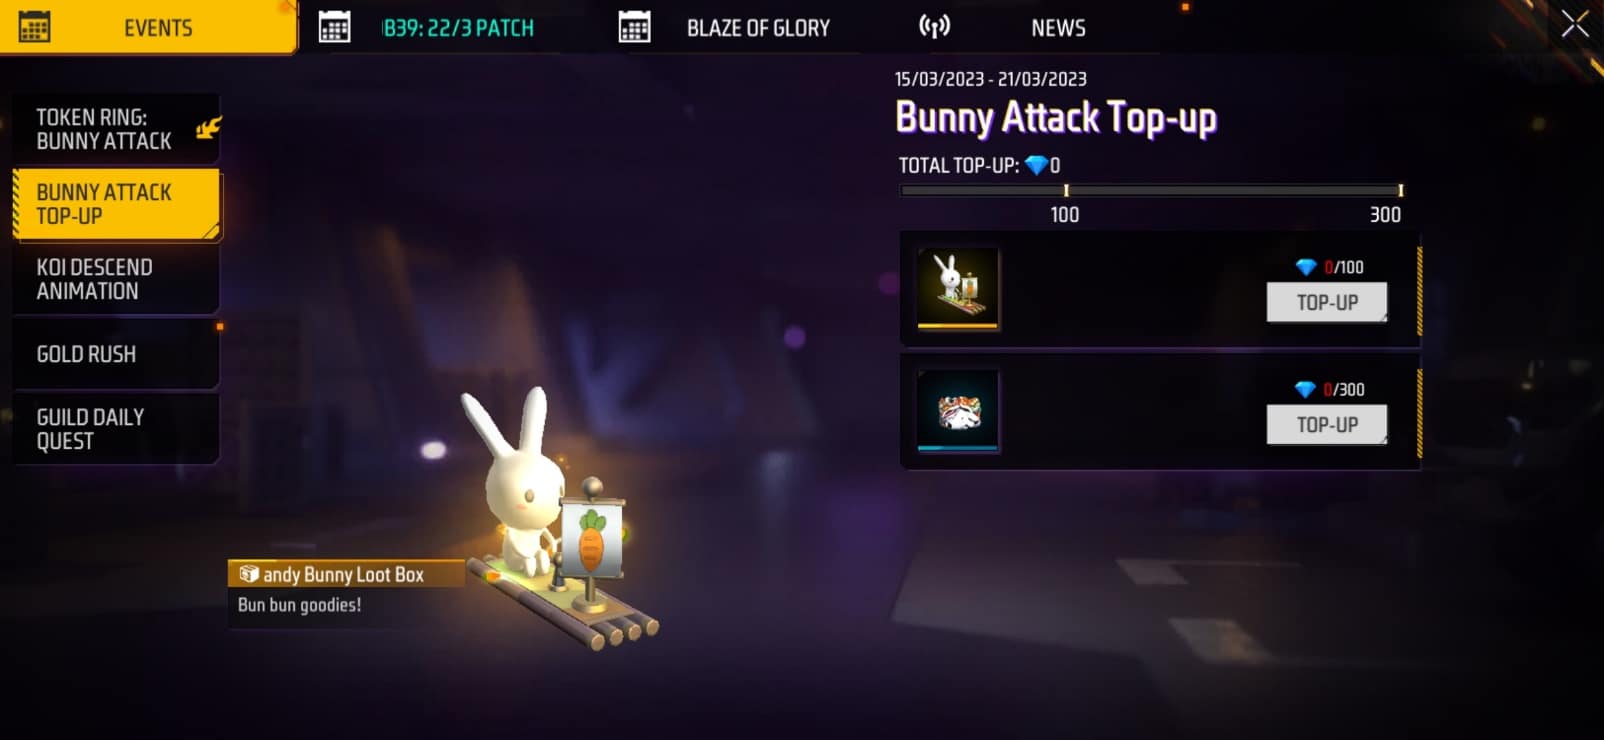 How To Get The Candy Bunny Gloo Wall In Free Fire Max